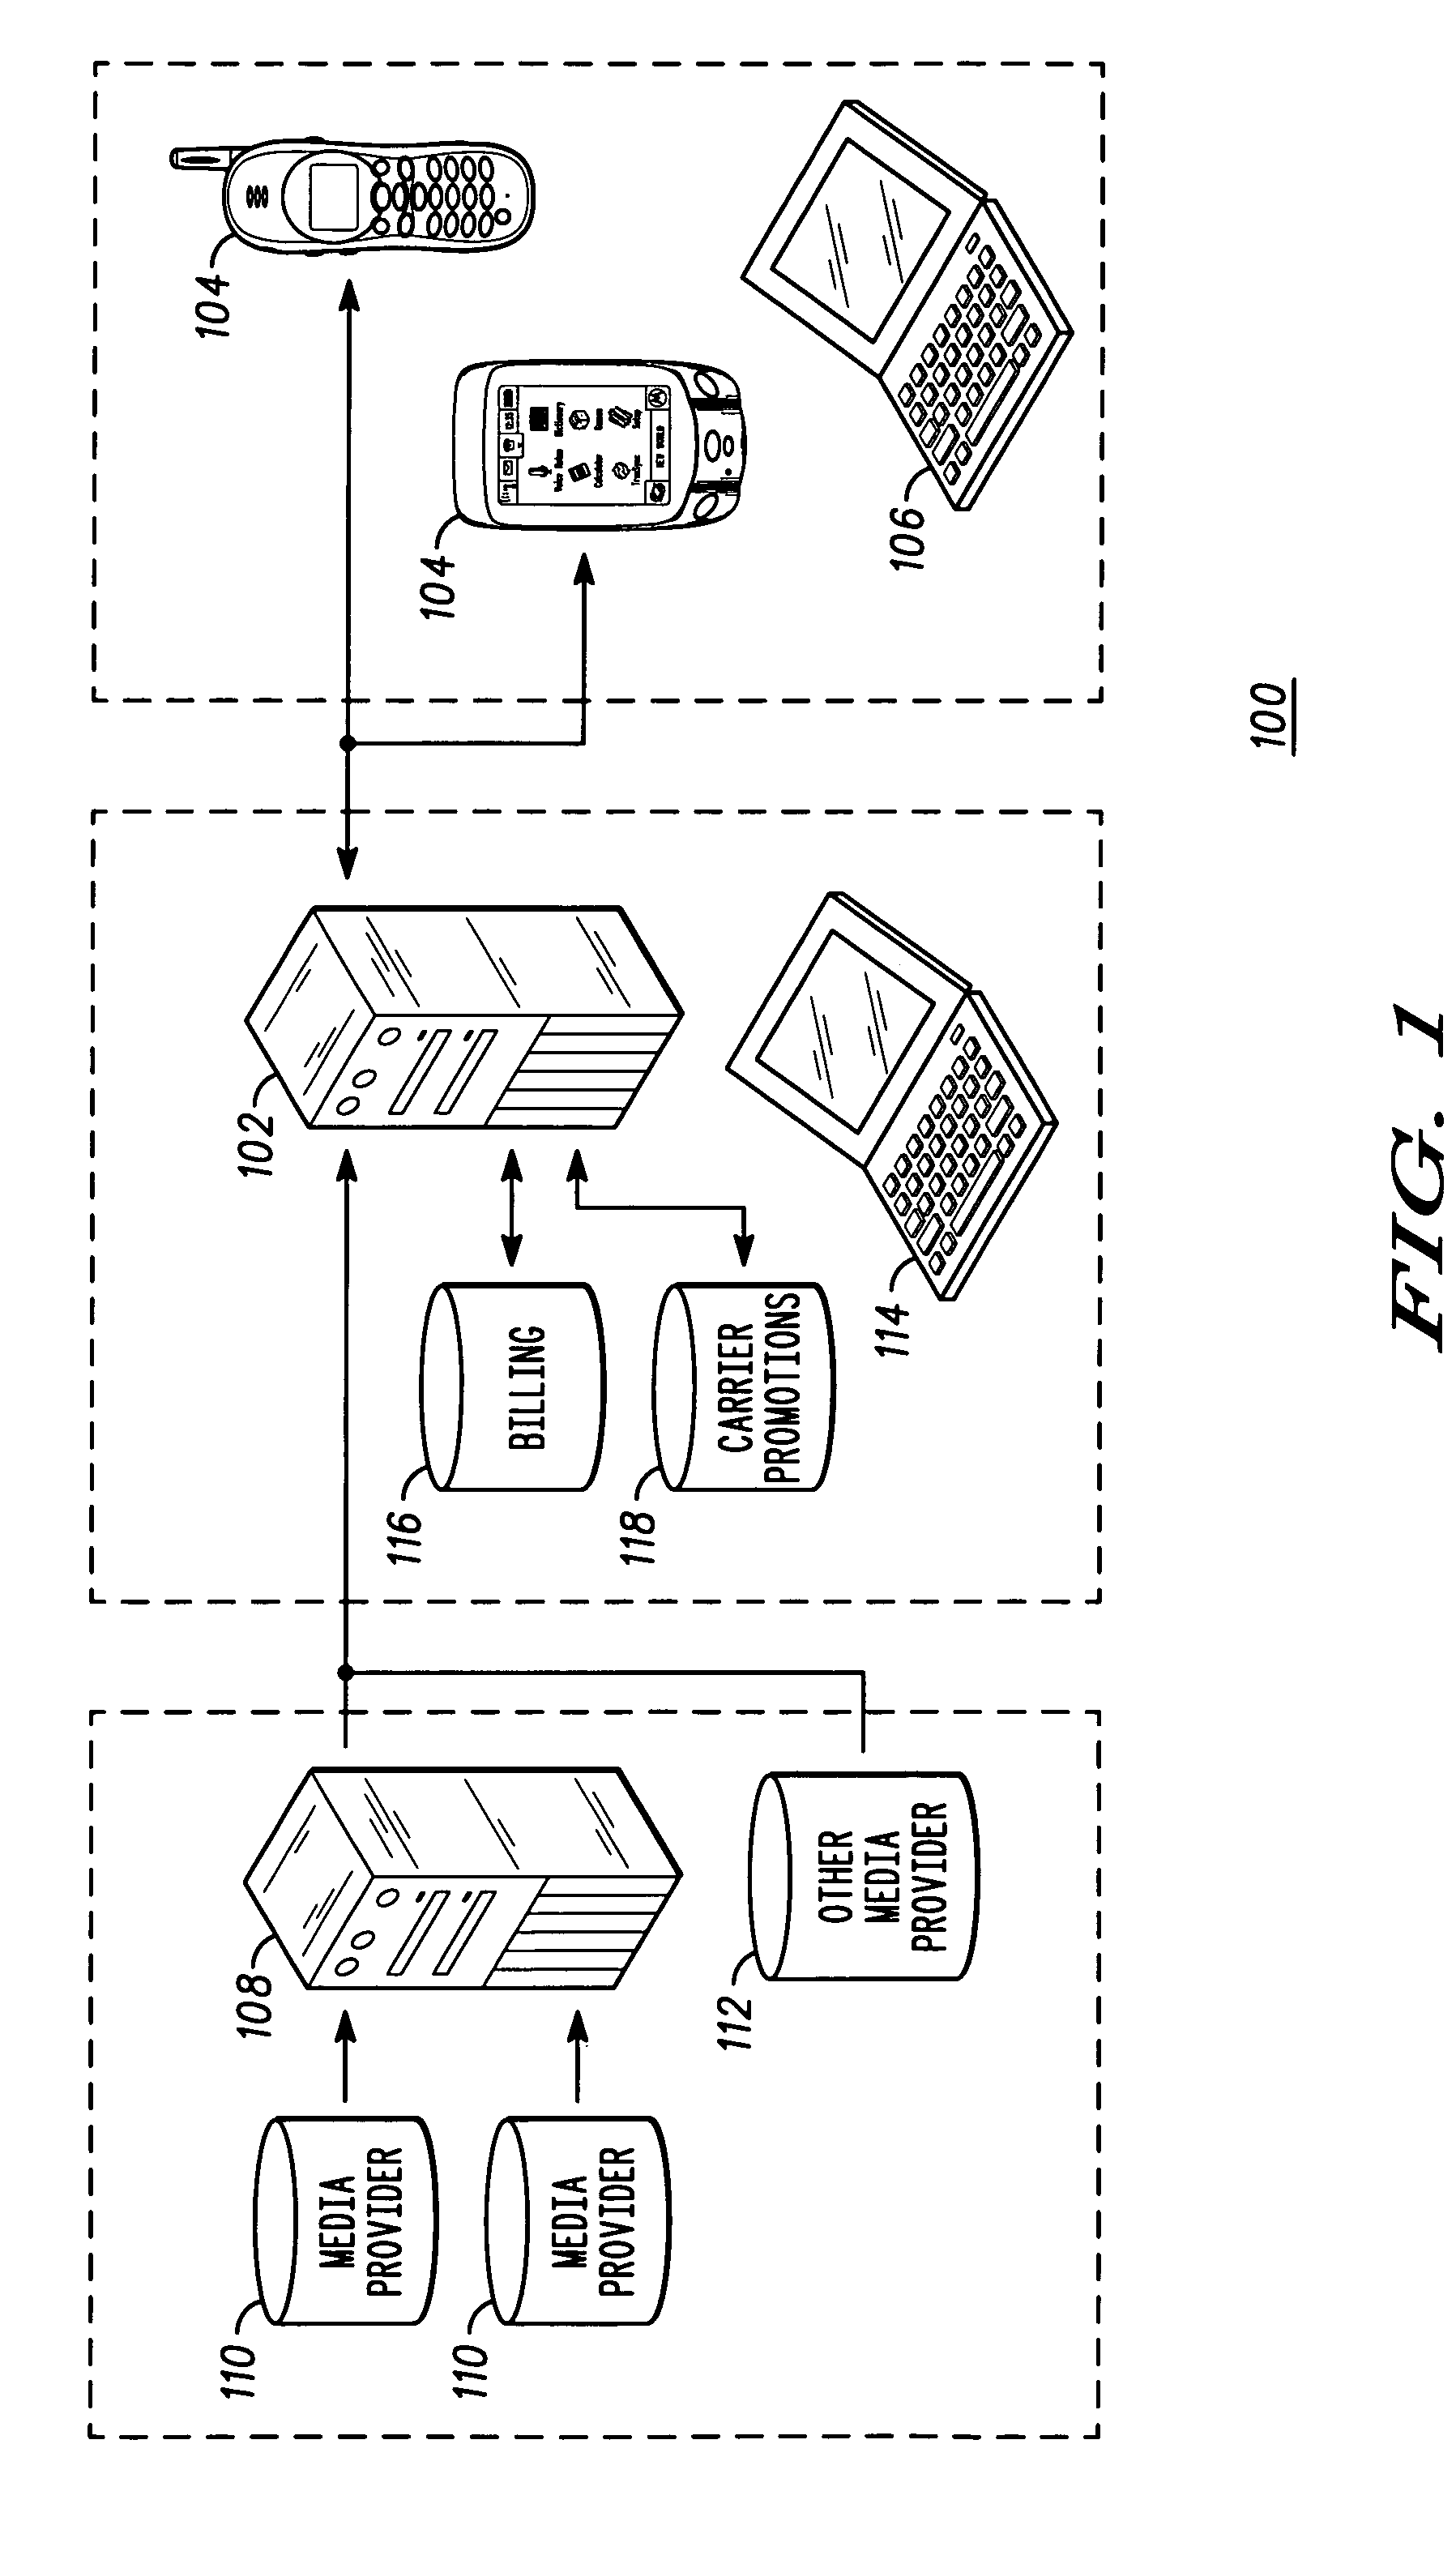 System and method for presenting and editing customized media streams to a content providing device